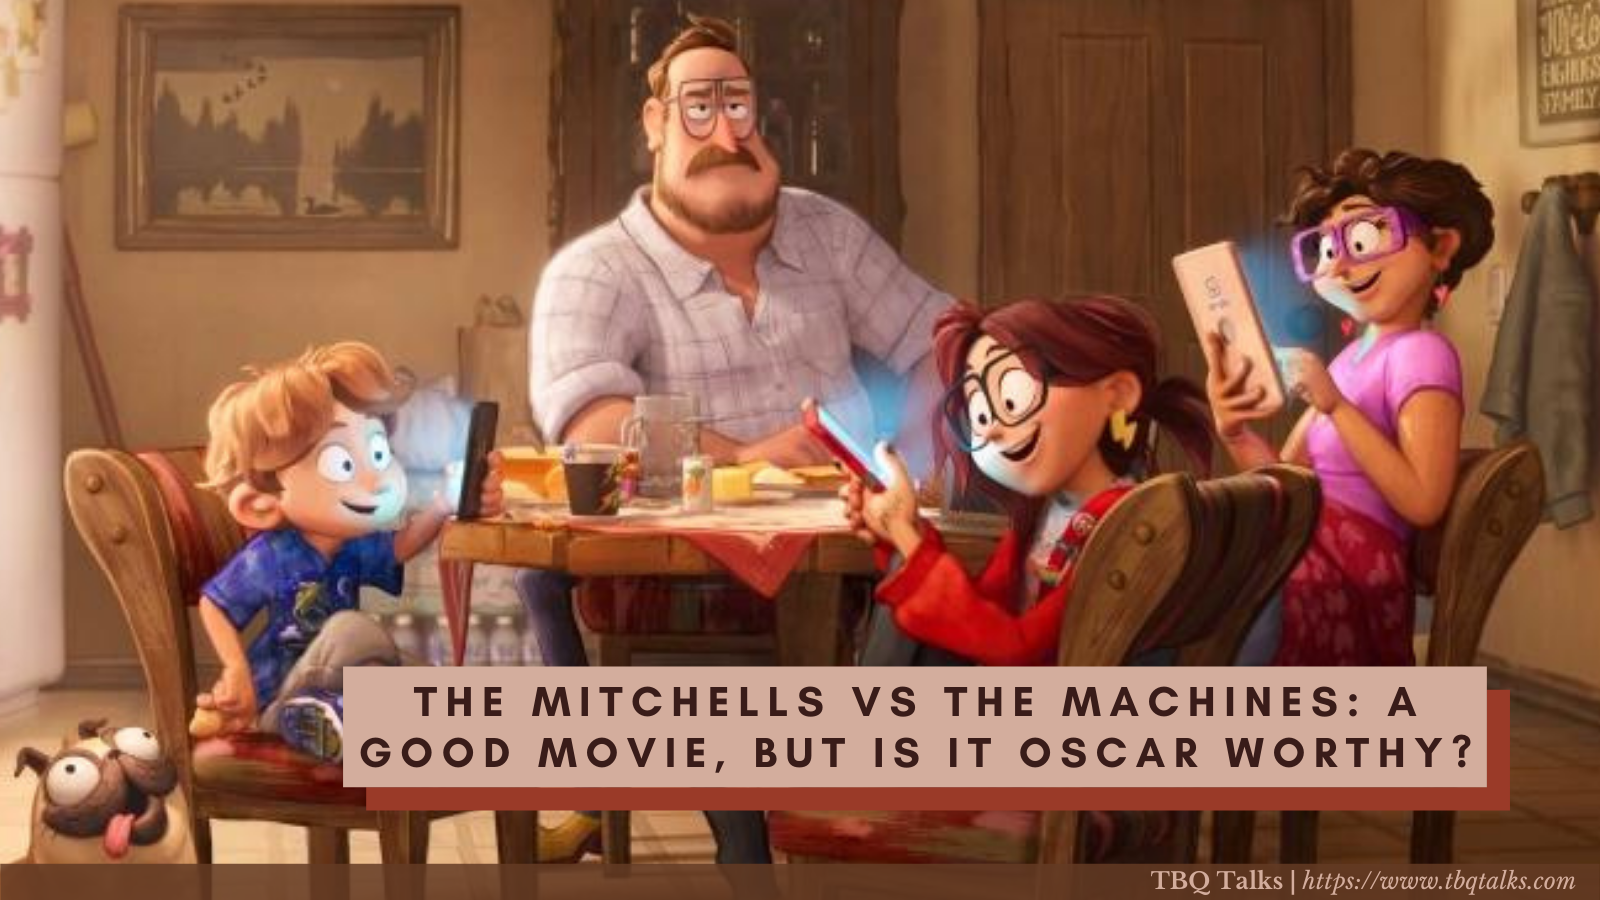 The Mitchells vs the Machines: A Good Movie, But is it Oscar Worthy?